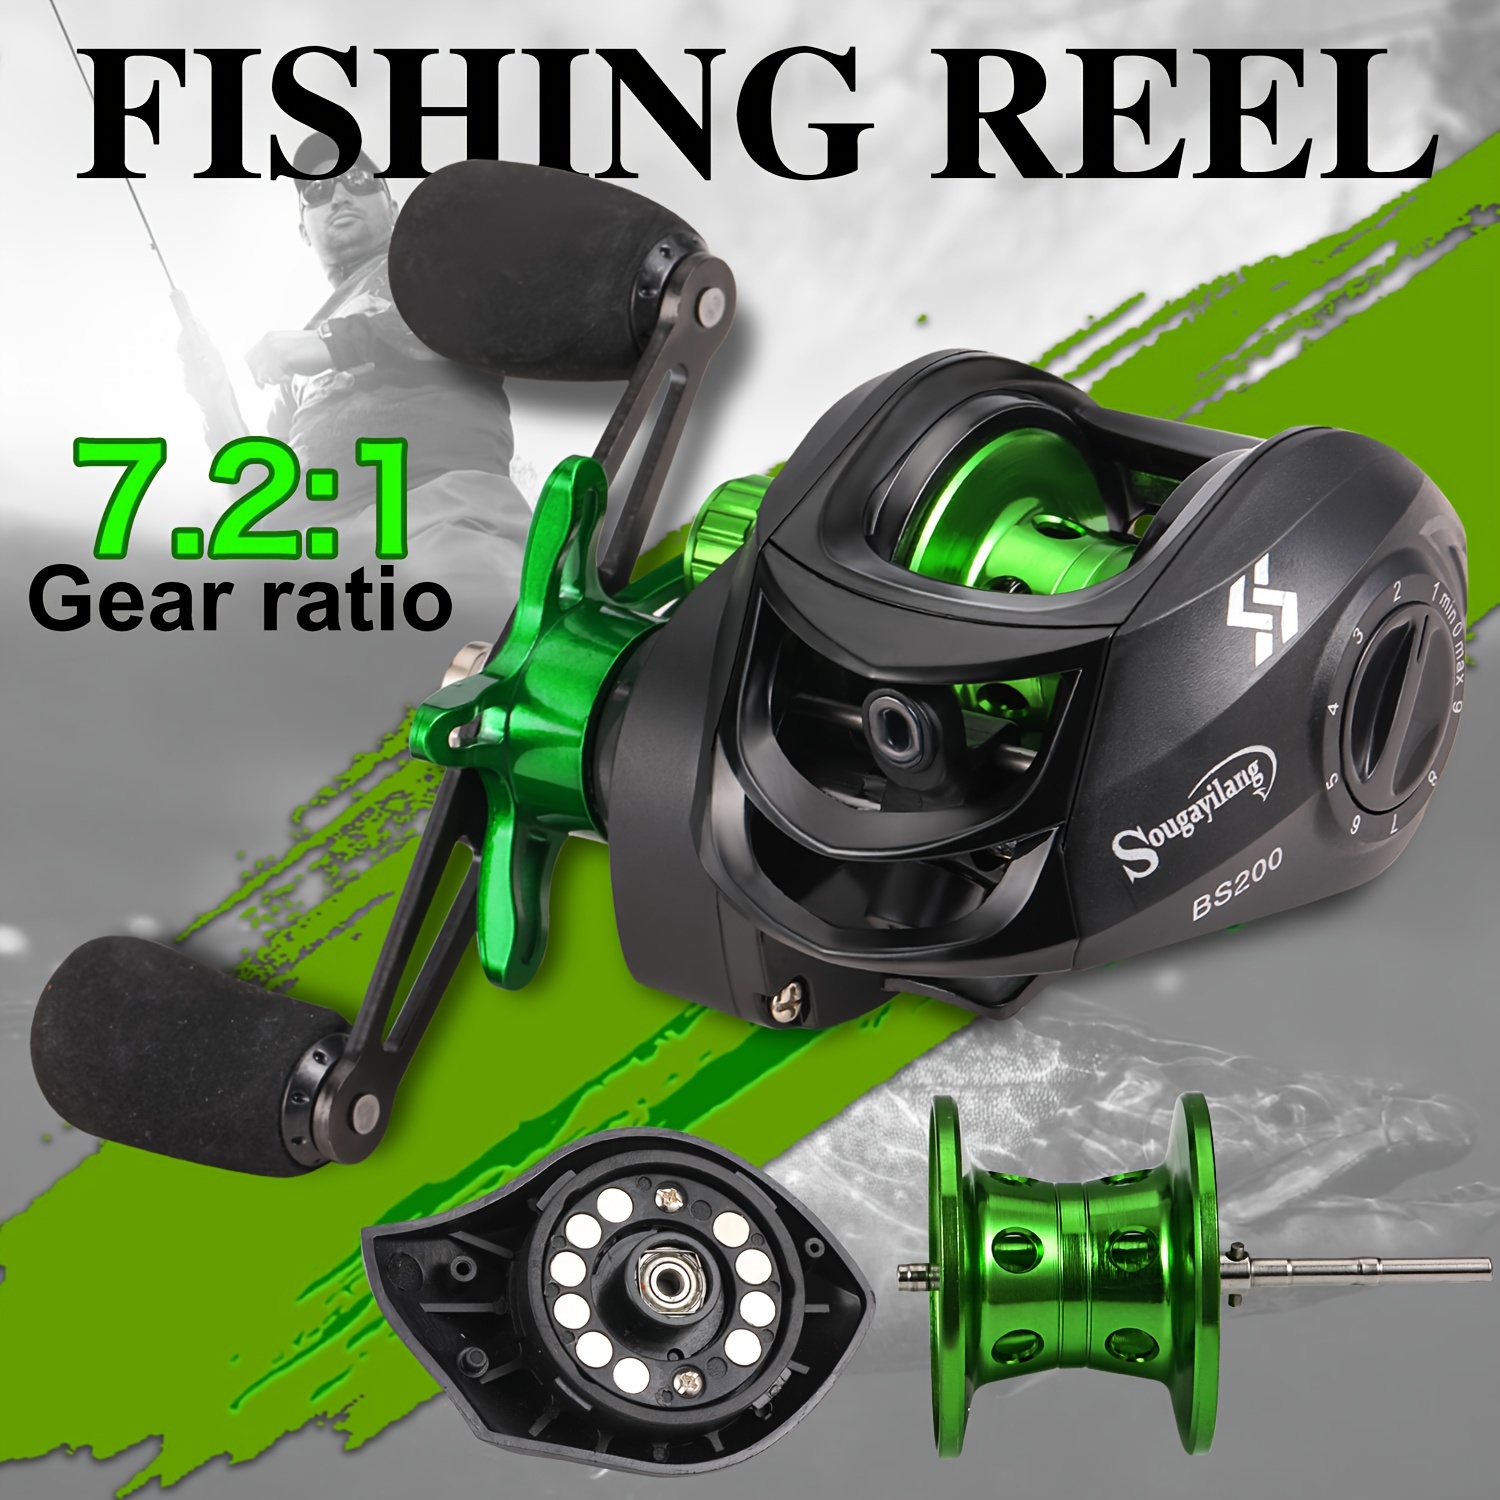 

7.2:1 Gear Ratio Max Drag 10kg Baitcasting Reel With Aluminum Spool Smooth And Durable Metal Fishing Reel For Freshwater And Saltwater Baitcasting Reel Fishing Reel